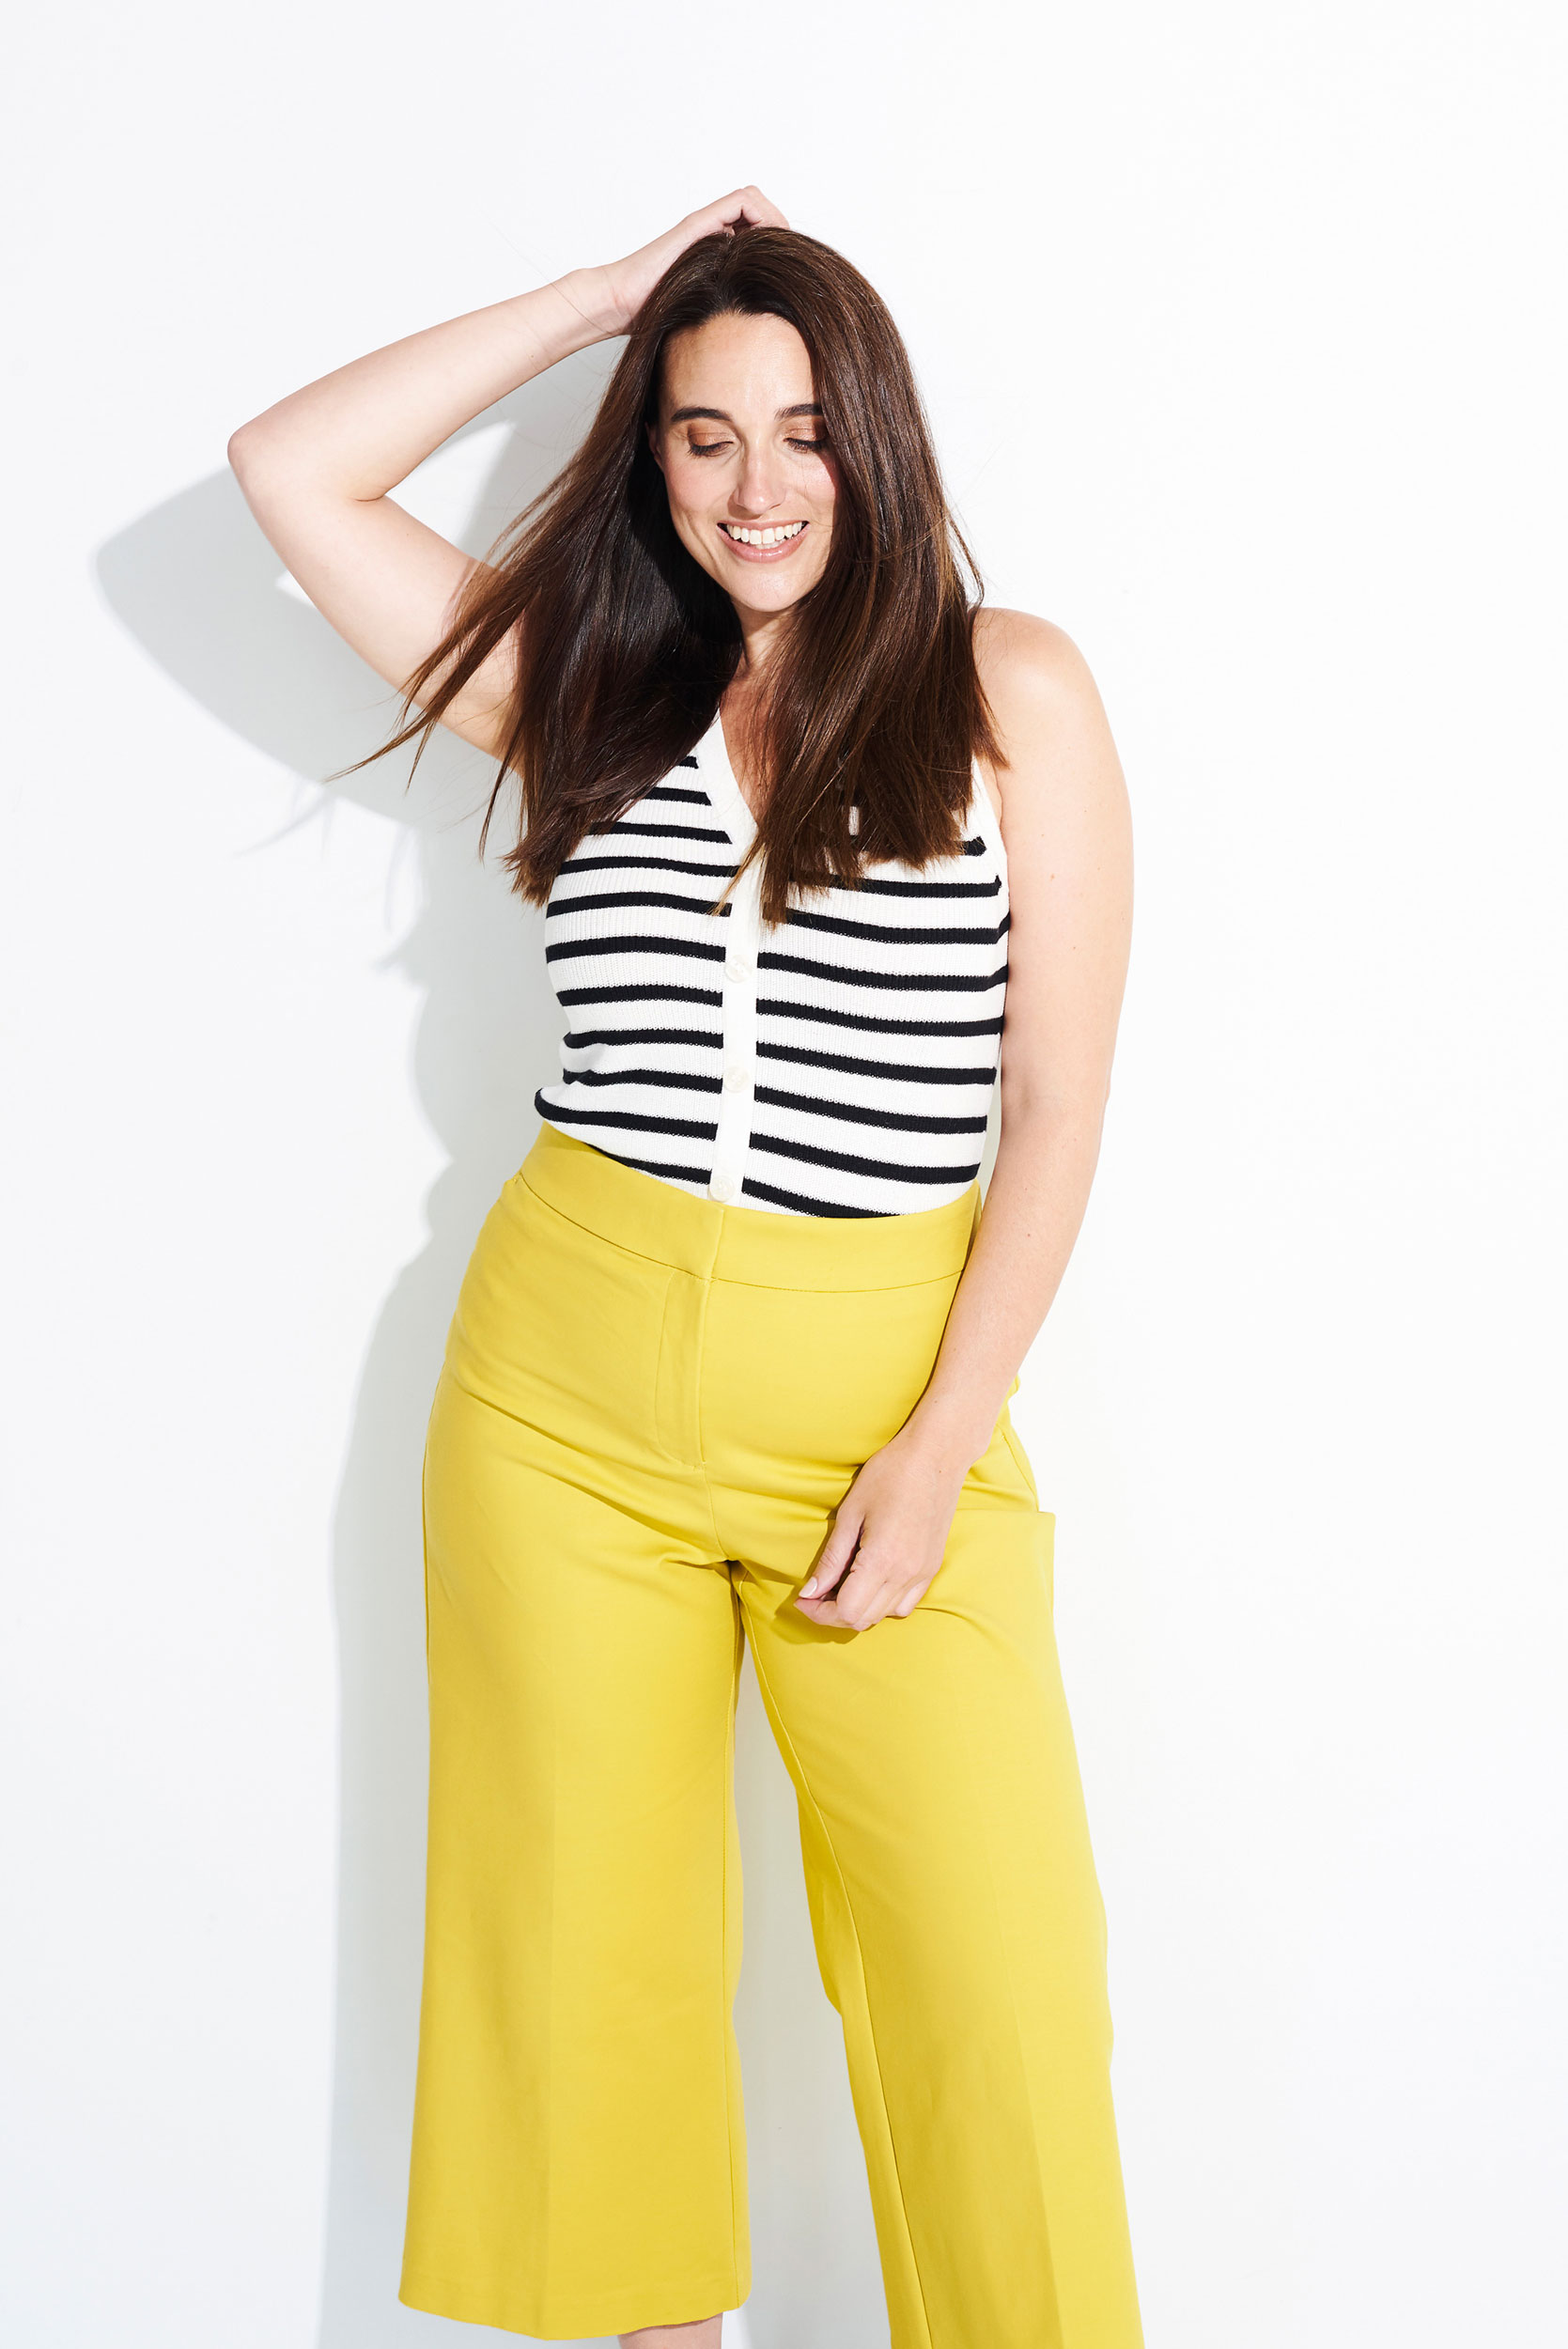 Brunette woman styled in striped top and yellow pants